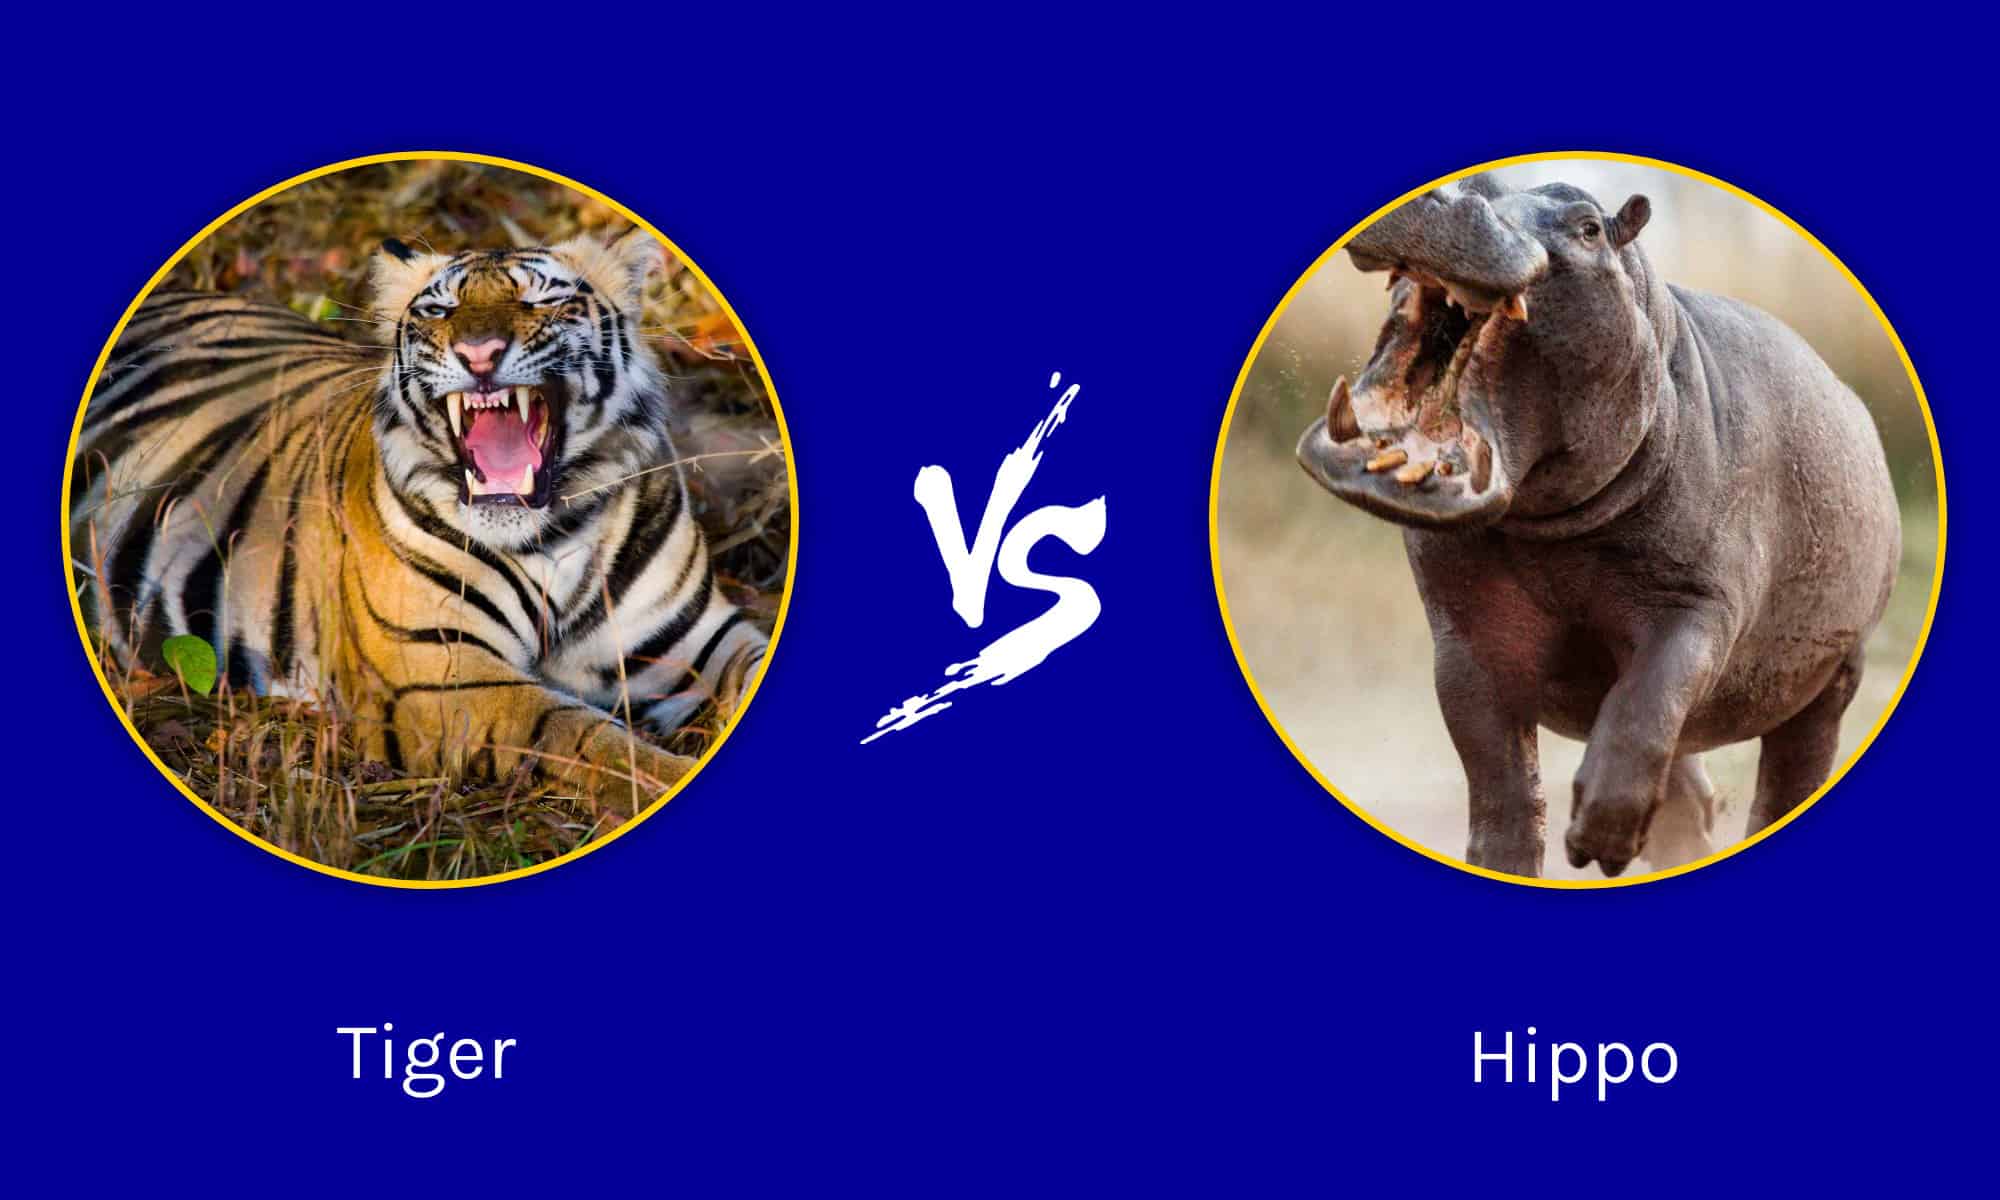 Who would win in a fight between a Ngandong tiger and a Siberian